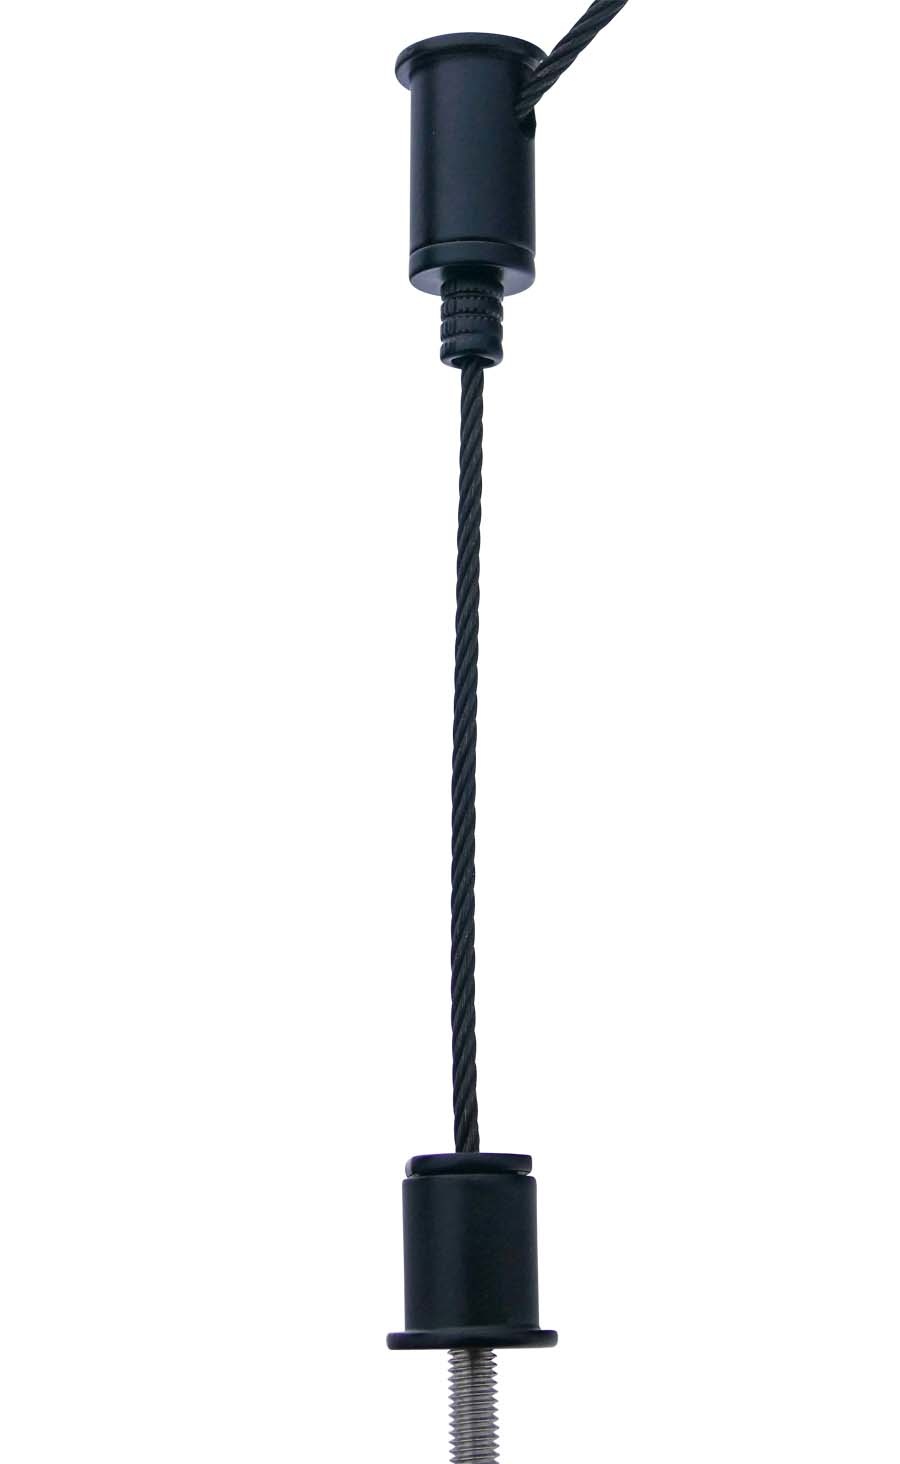 Cable suspension (4 pcs) with ceiling screw and counterpart with